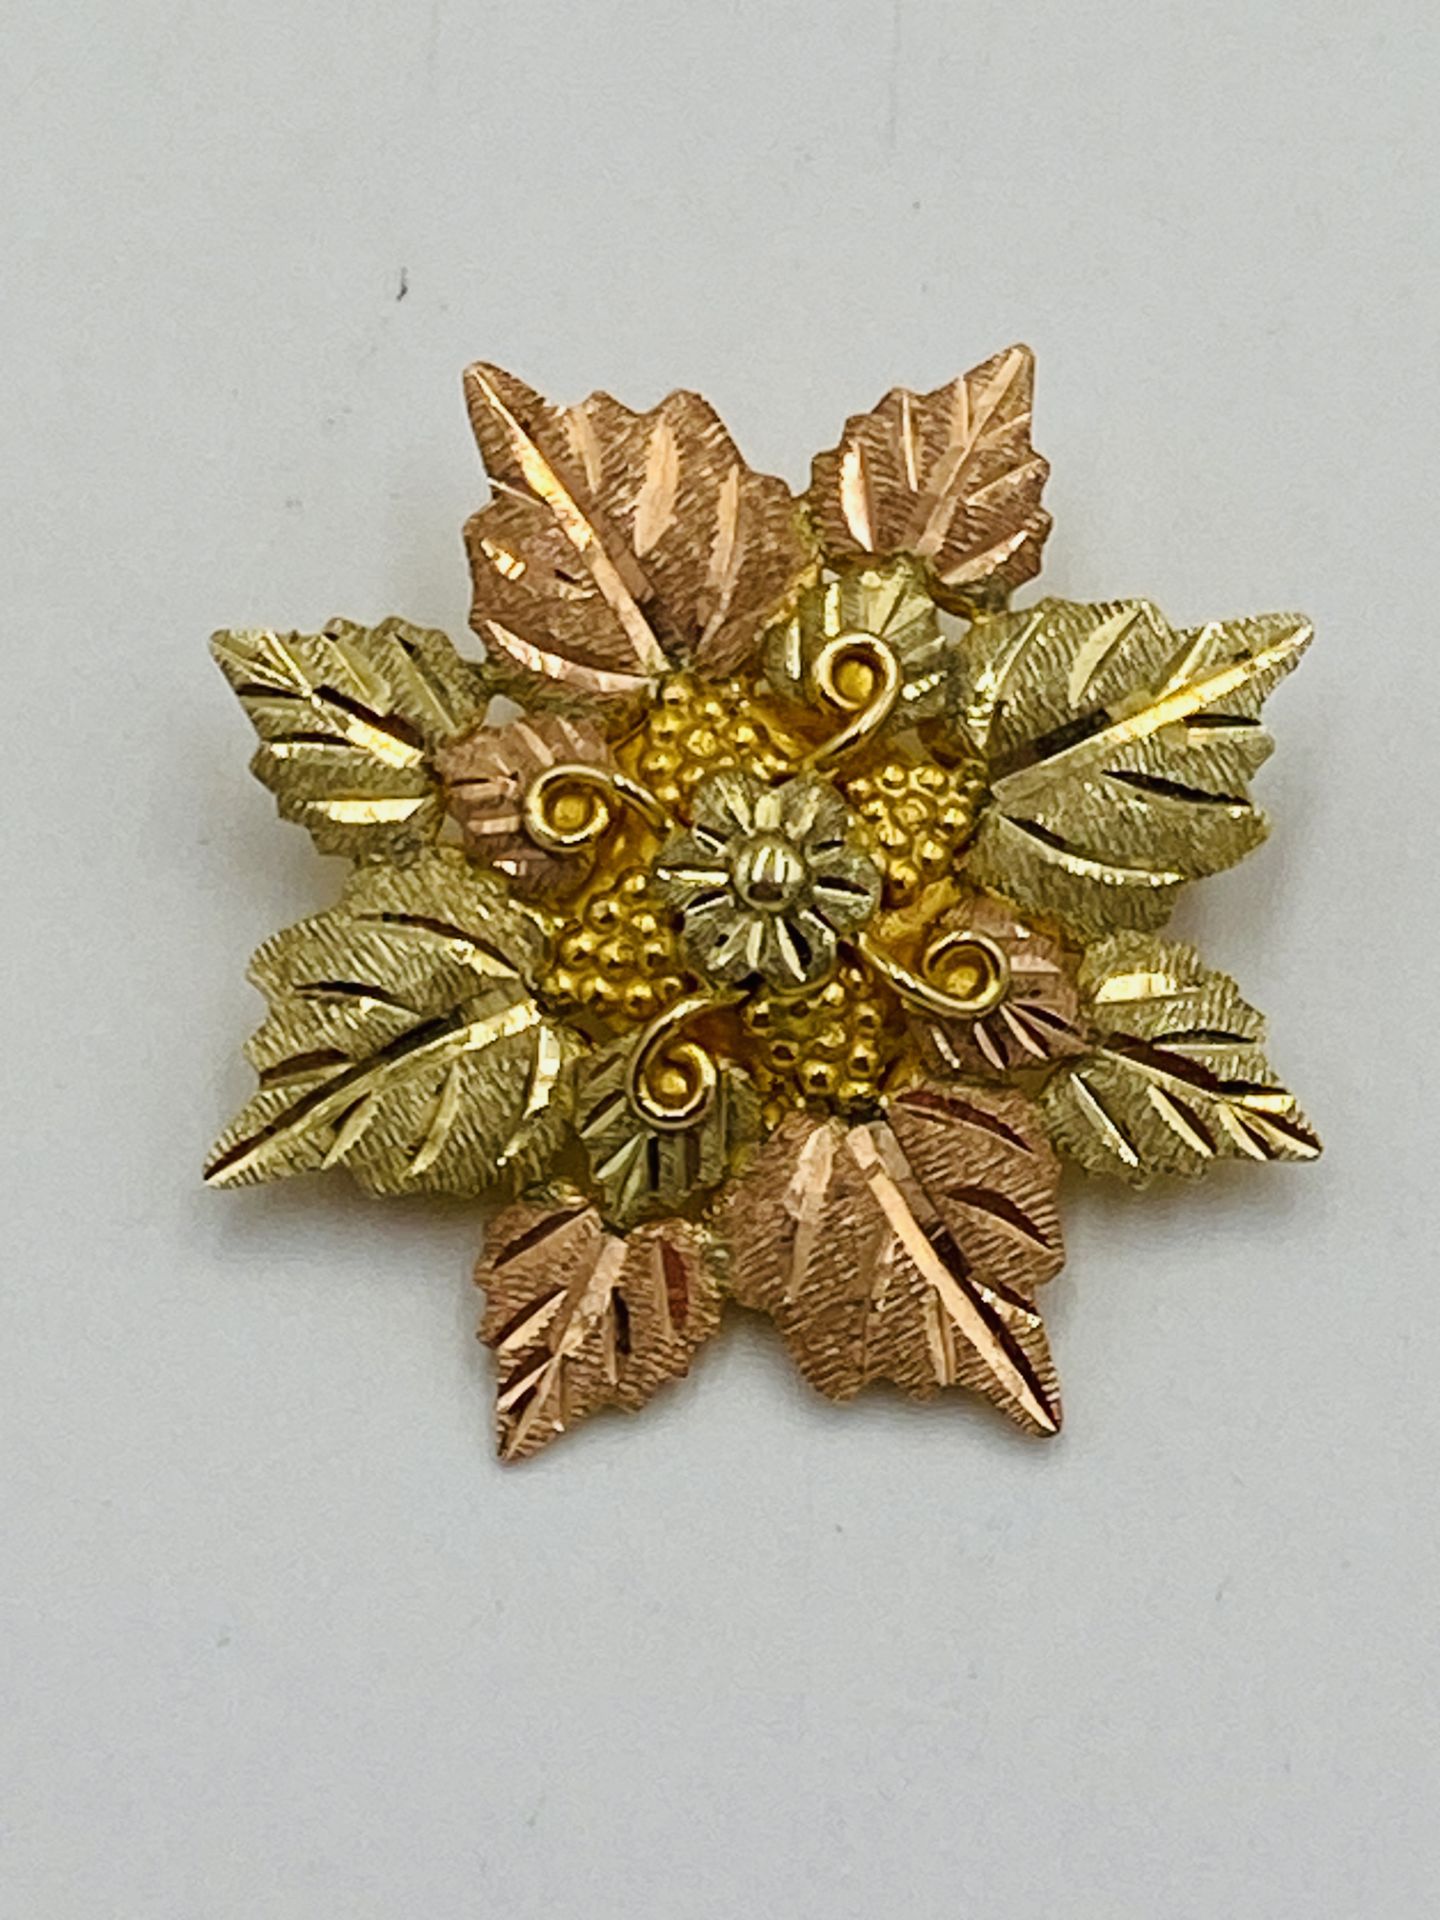 9ct gold brooch - Image 3 of 3